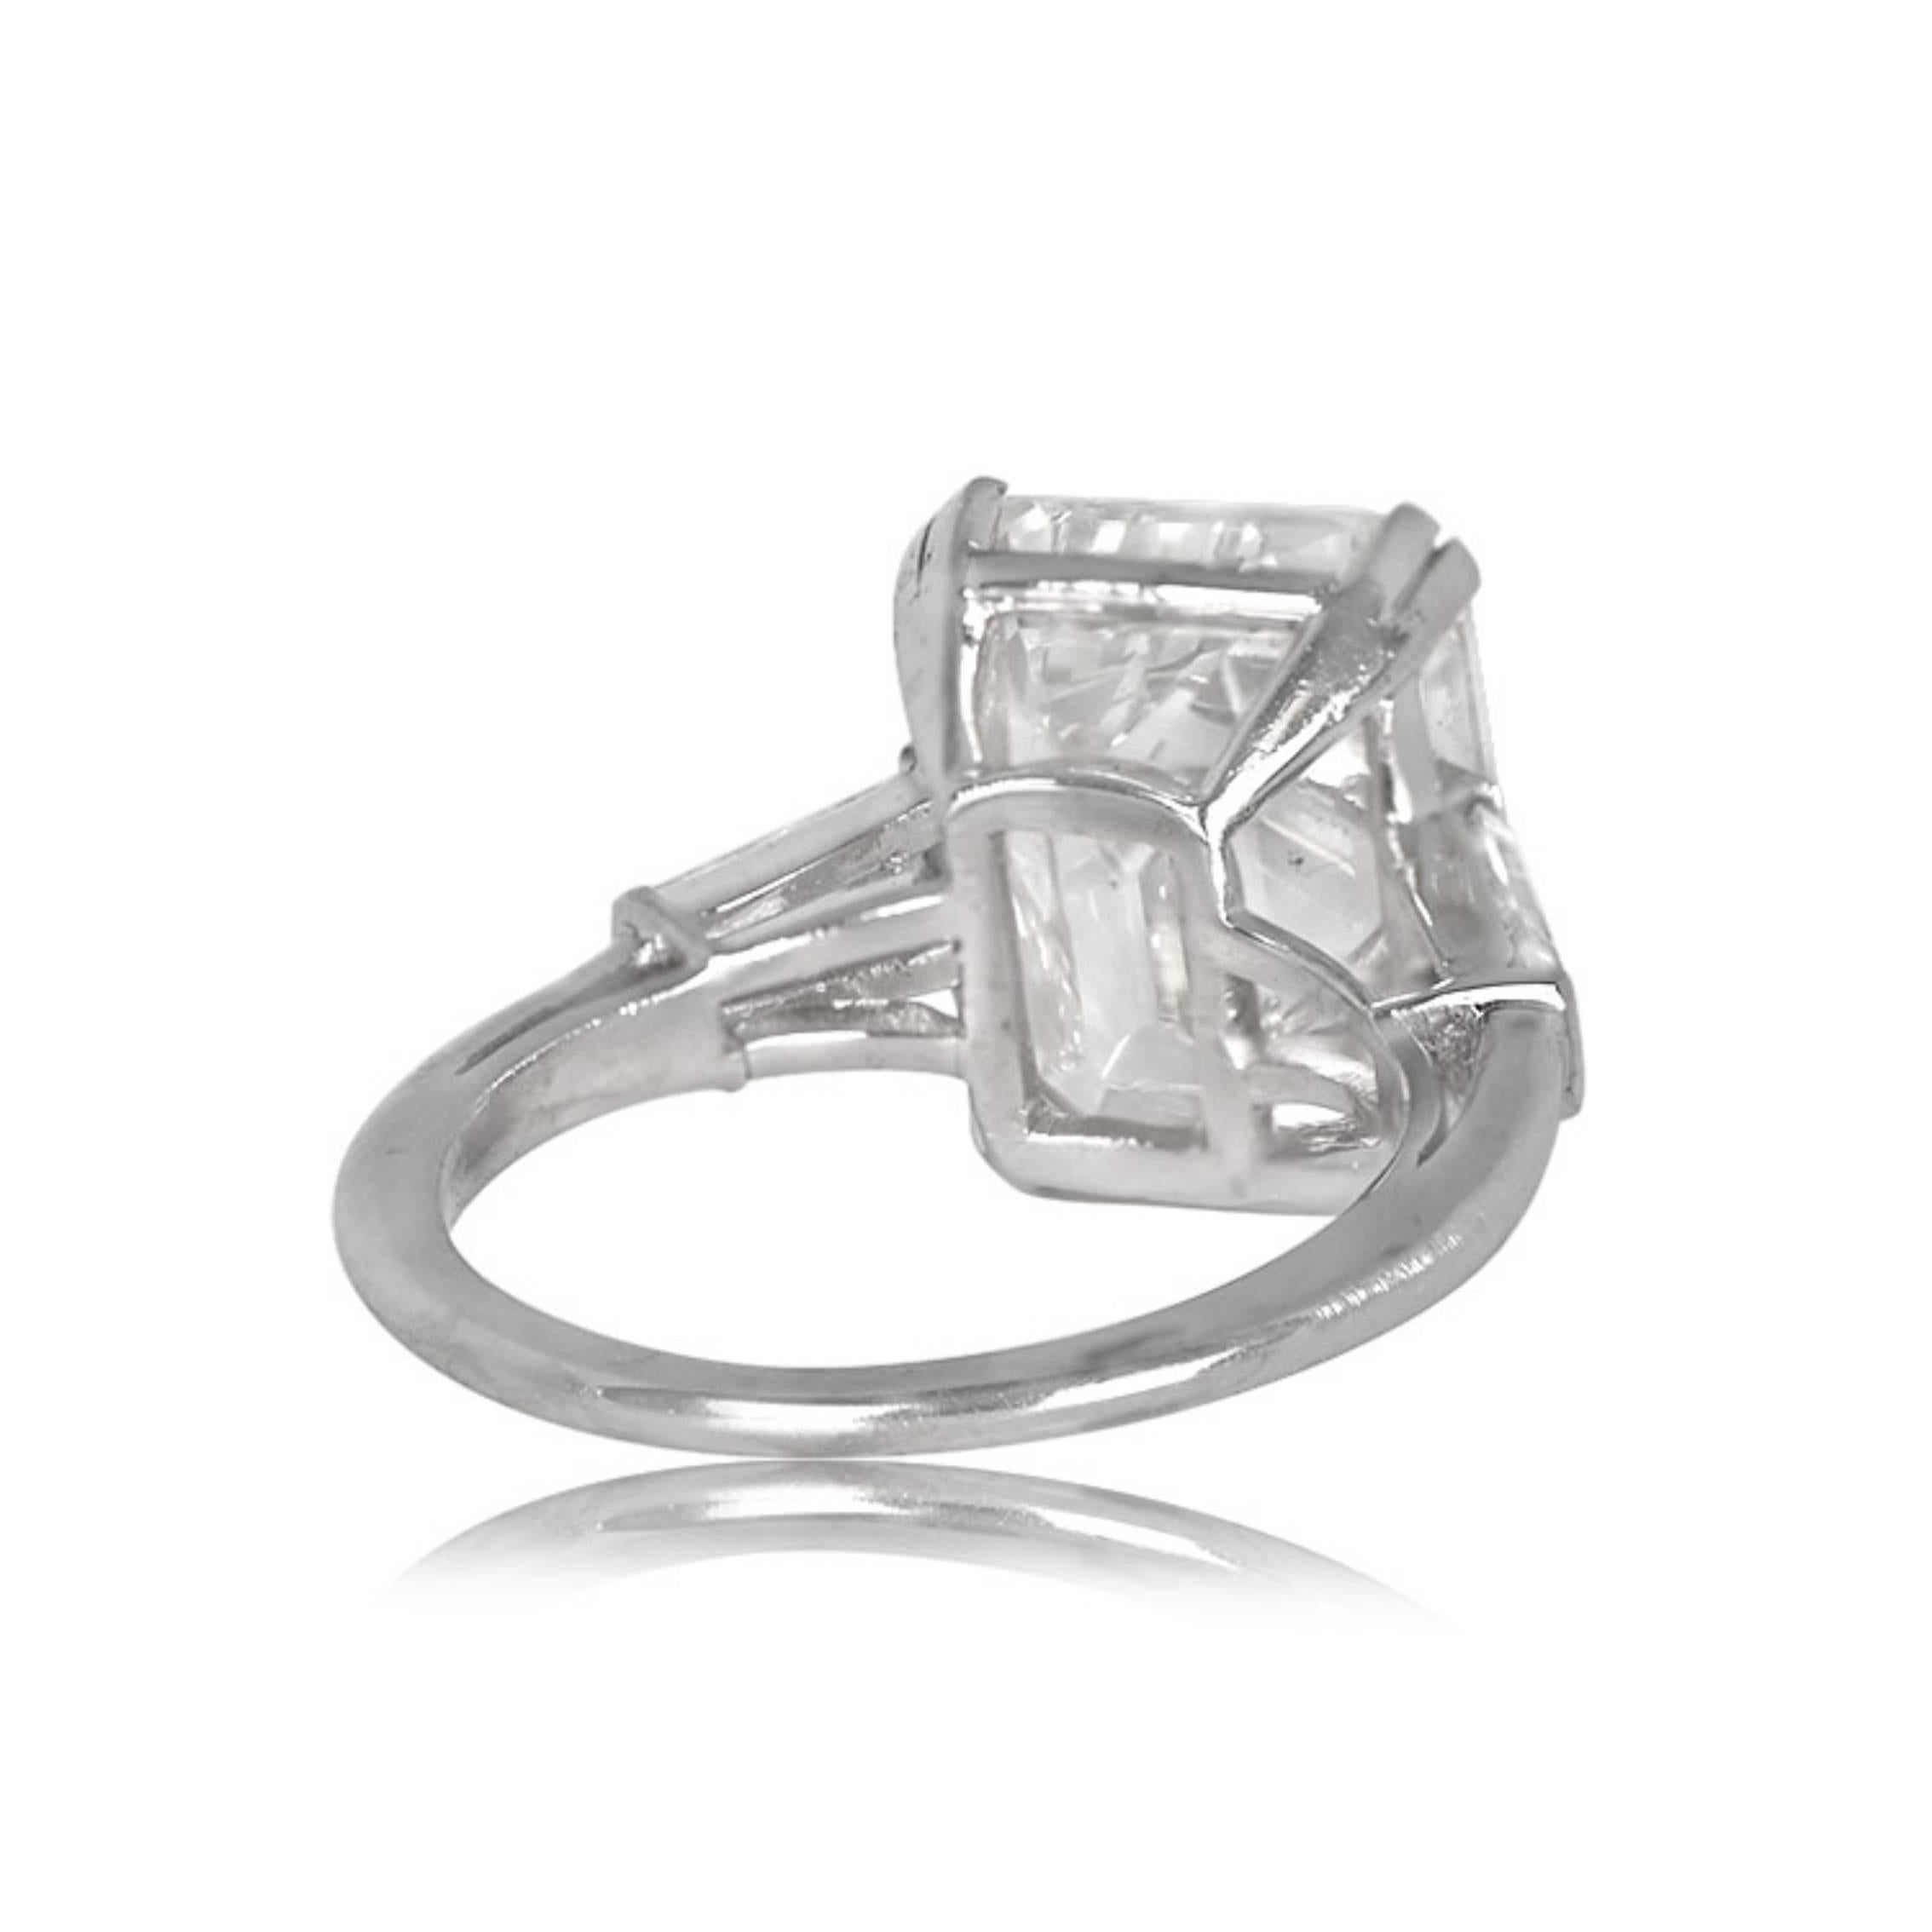 Vintage 6.49ct Emerald Cut Diamond Engagement Ring, Platinum, Circa 1950 In Excellent Condition For Sale In New York, NY